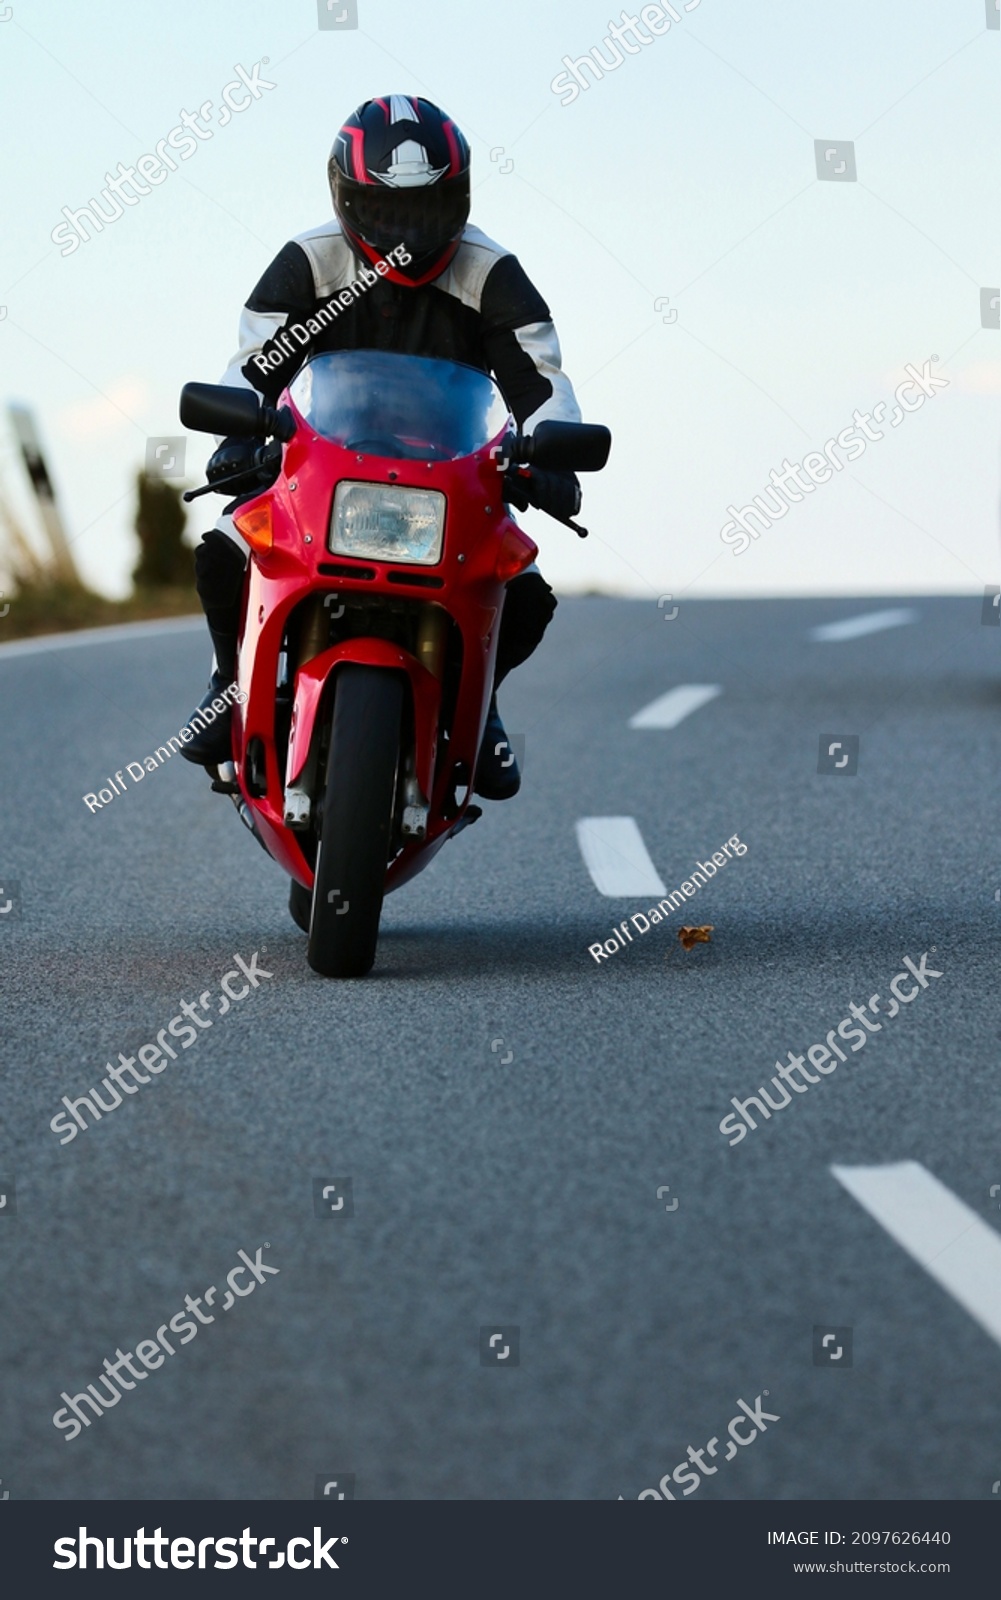 Red motorcycle with driver in leather suit while driving on a road with a slight side position, photographed from the front.
 #2097626440